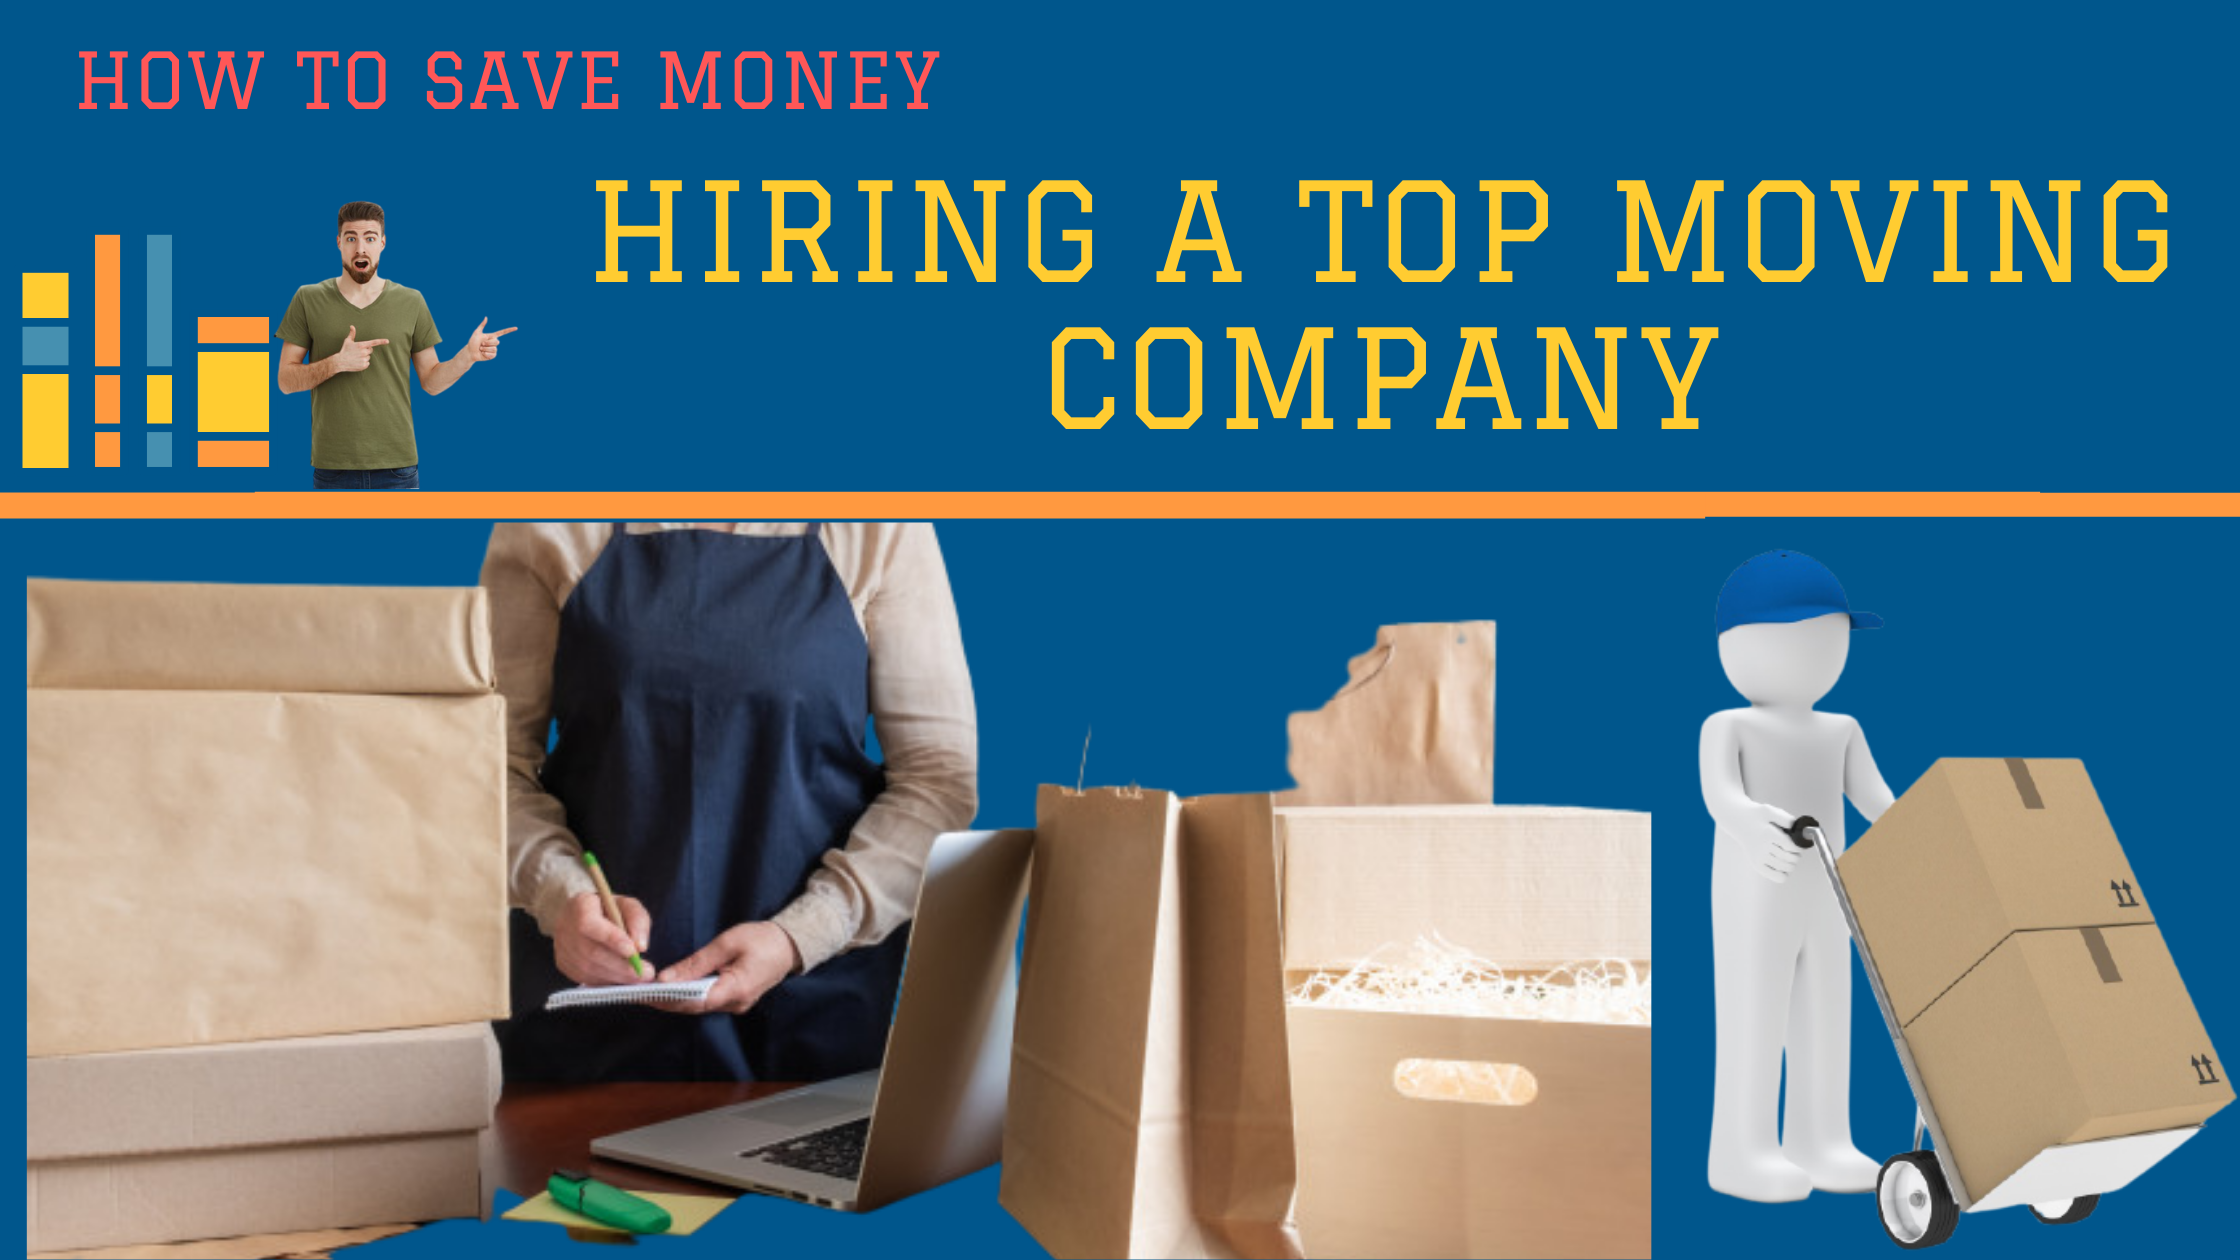 How To Save Money While Hiring a Top Moving Company